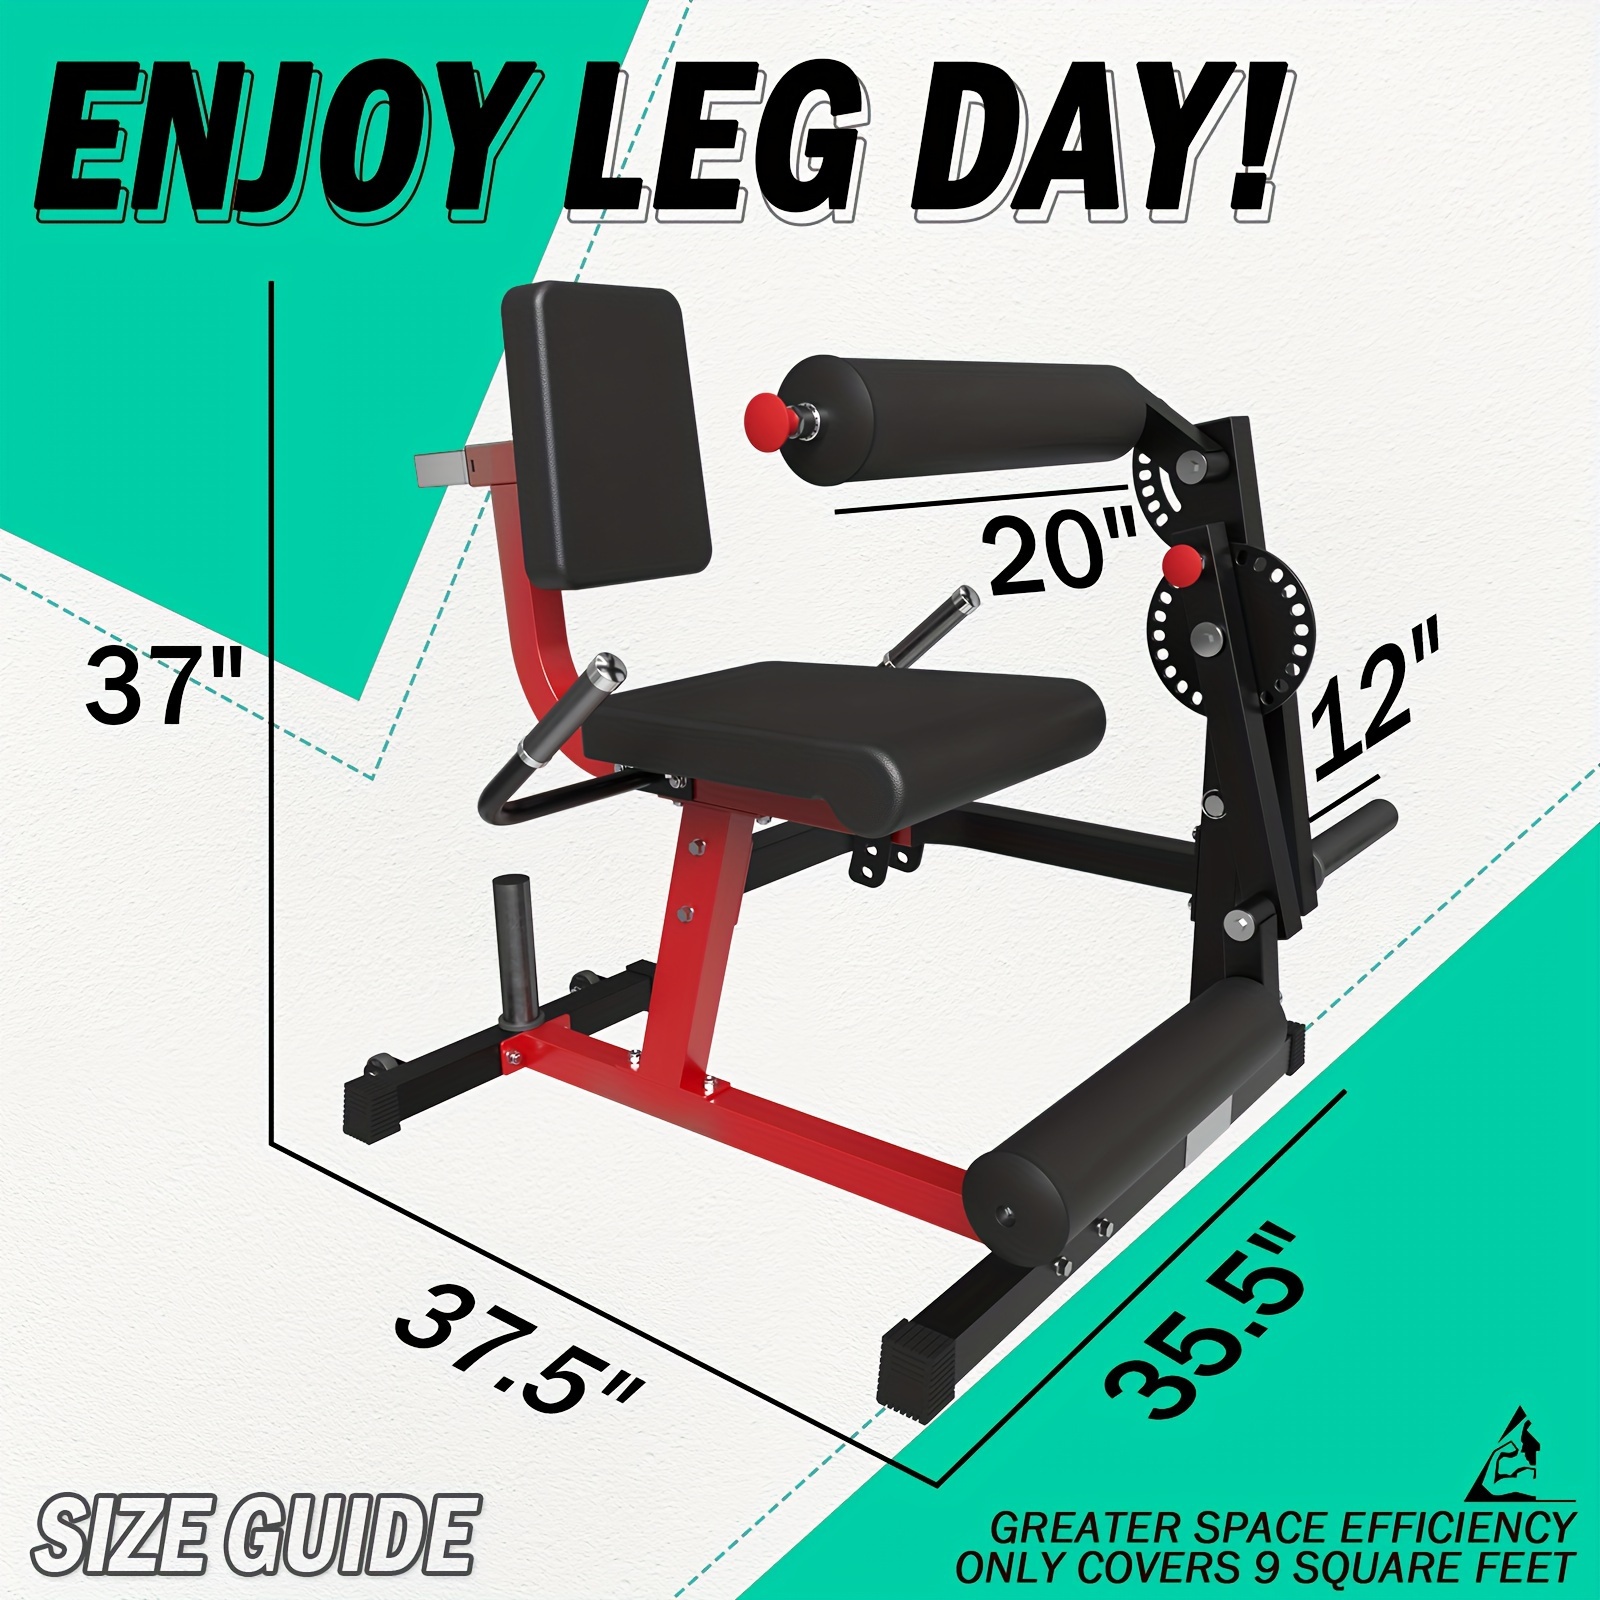 

Syedee Leg Extension And Machine, Lower Body Special Leg Machine, Adjustable Leg Exercise Bench With Plate Loaded, Leg Rotary Extension For Thigh, Home Gym Weight Machine